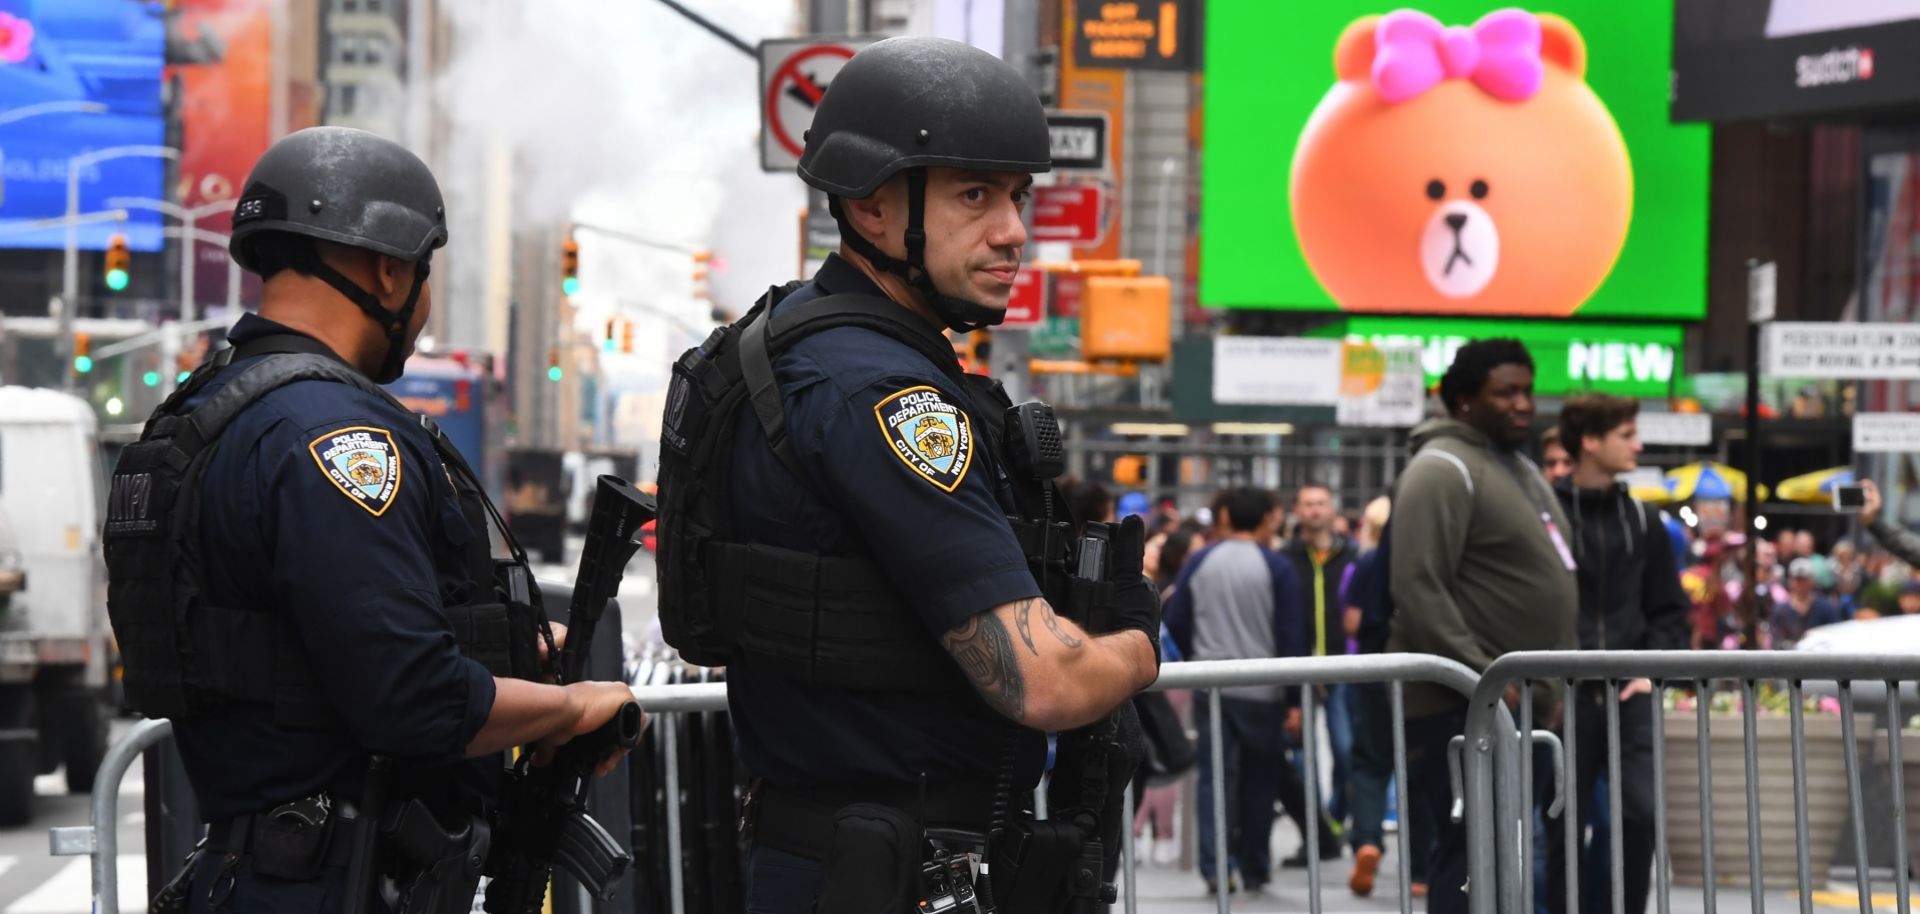 New York City police officers patrol Times Square on May 23, 2017, the morning after the Islamic State claimed responsibility for a suicide bombing at an Ariana Grande concert in the United Kingdom that killed 22 people.